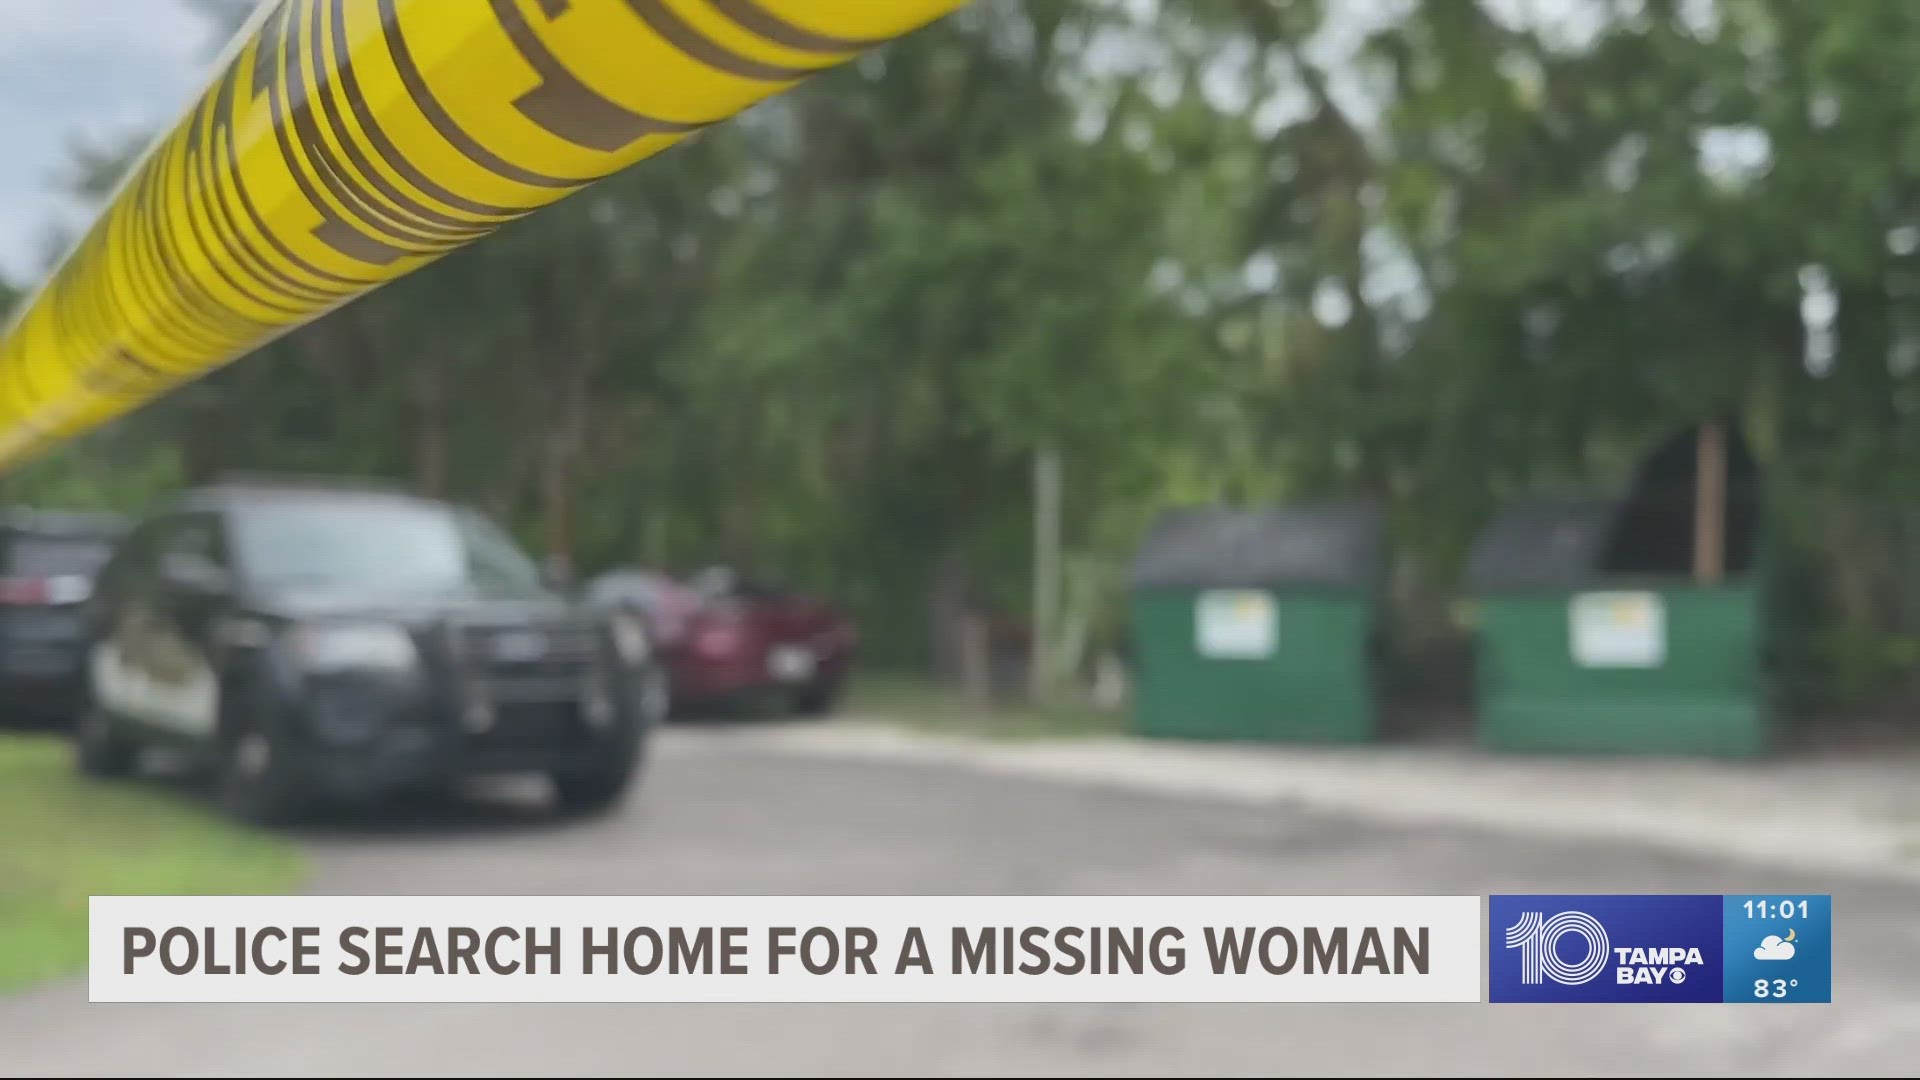 The homeowner said police are looking for Tonya Whipp, but he doesn't know where she is.